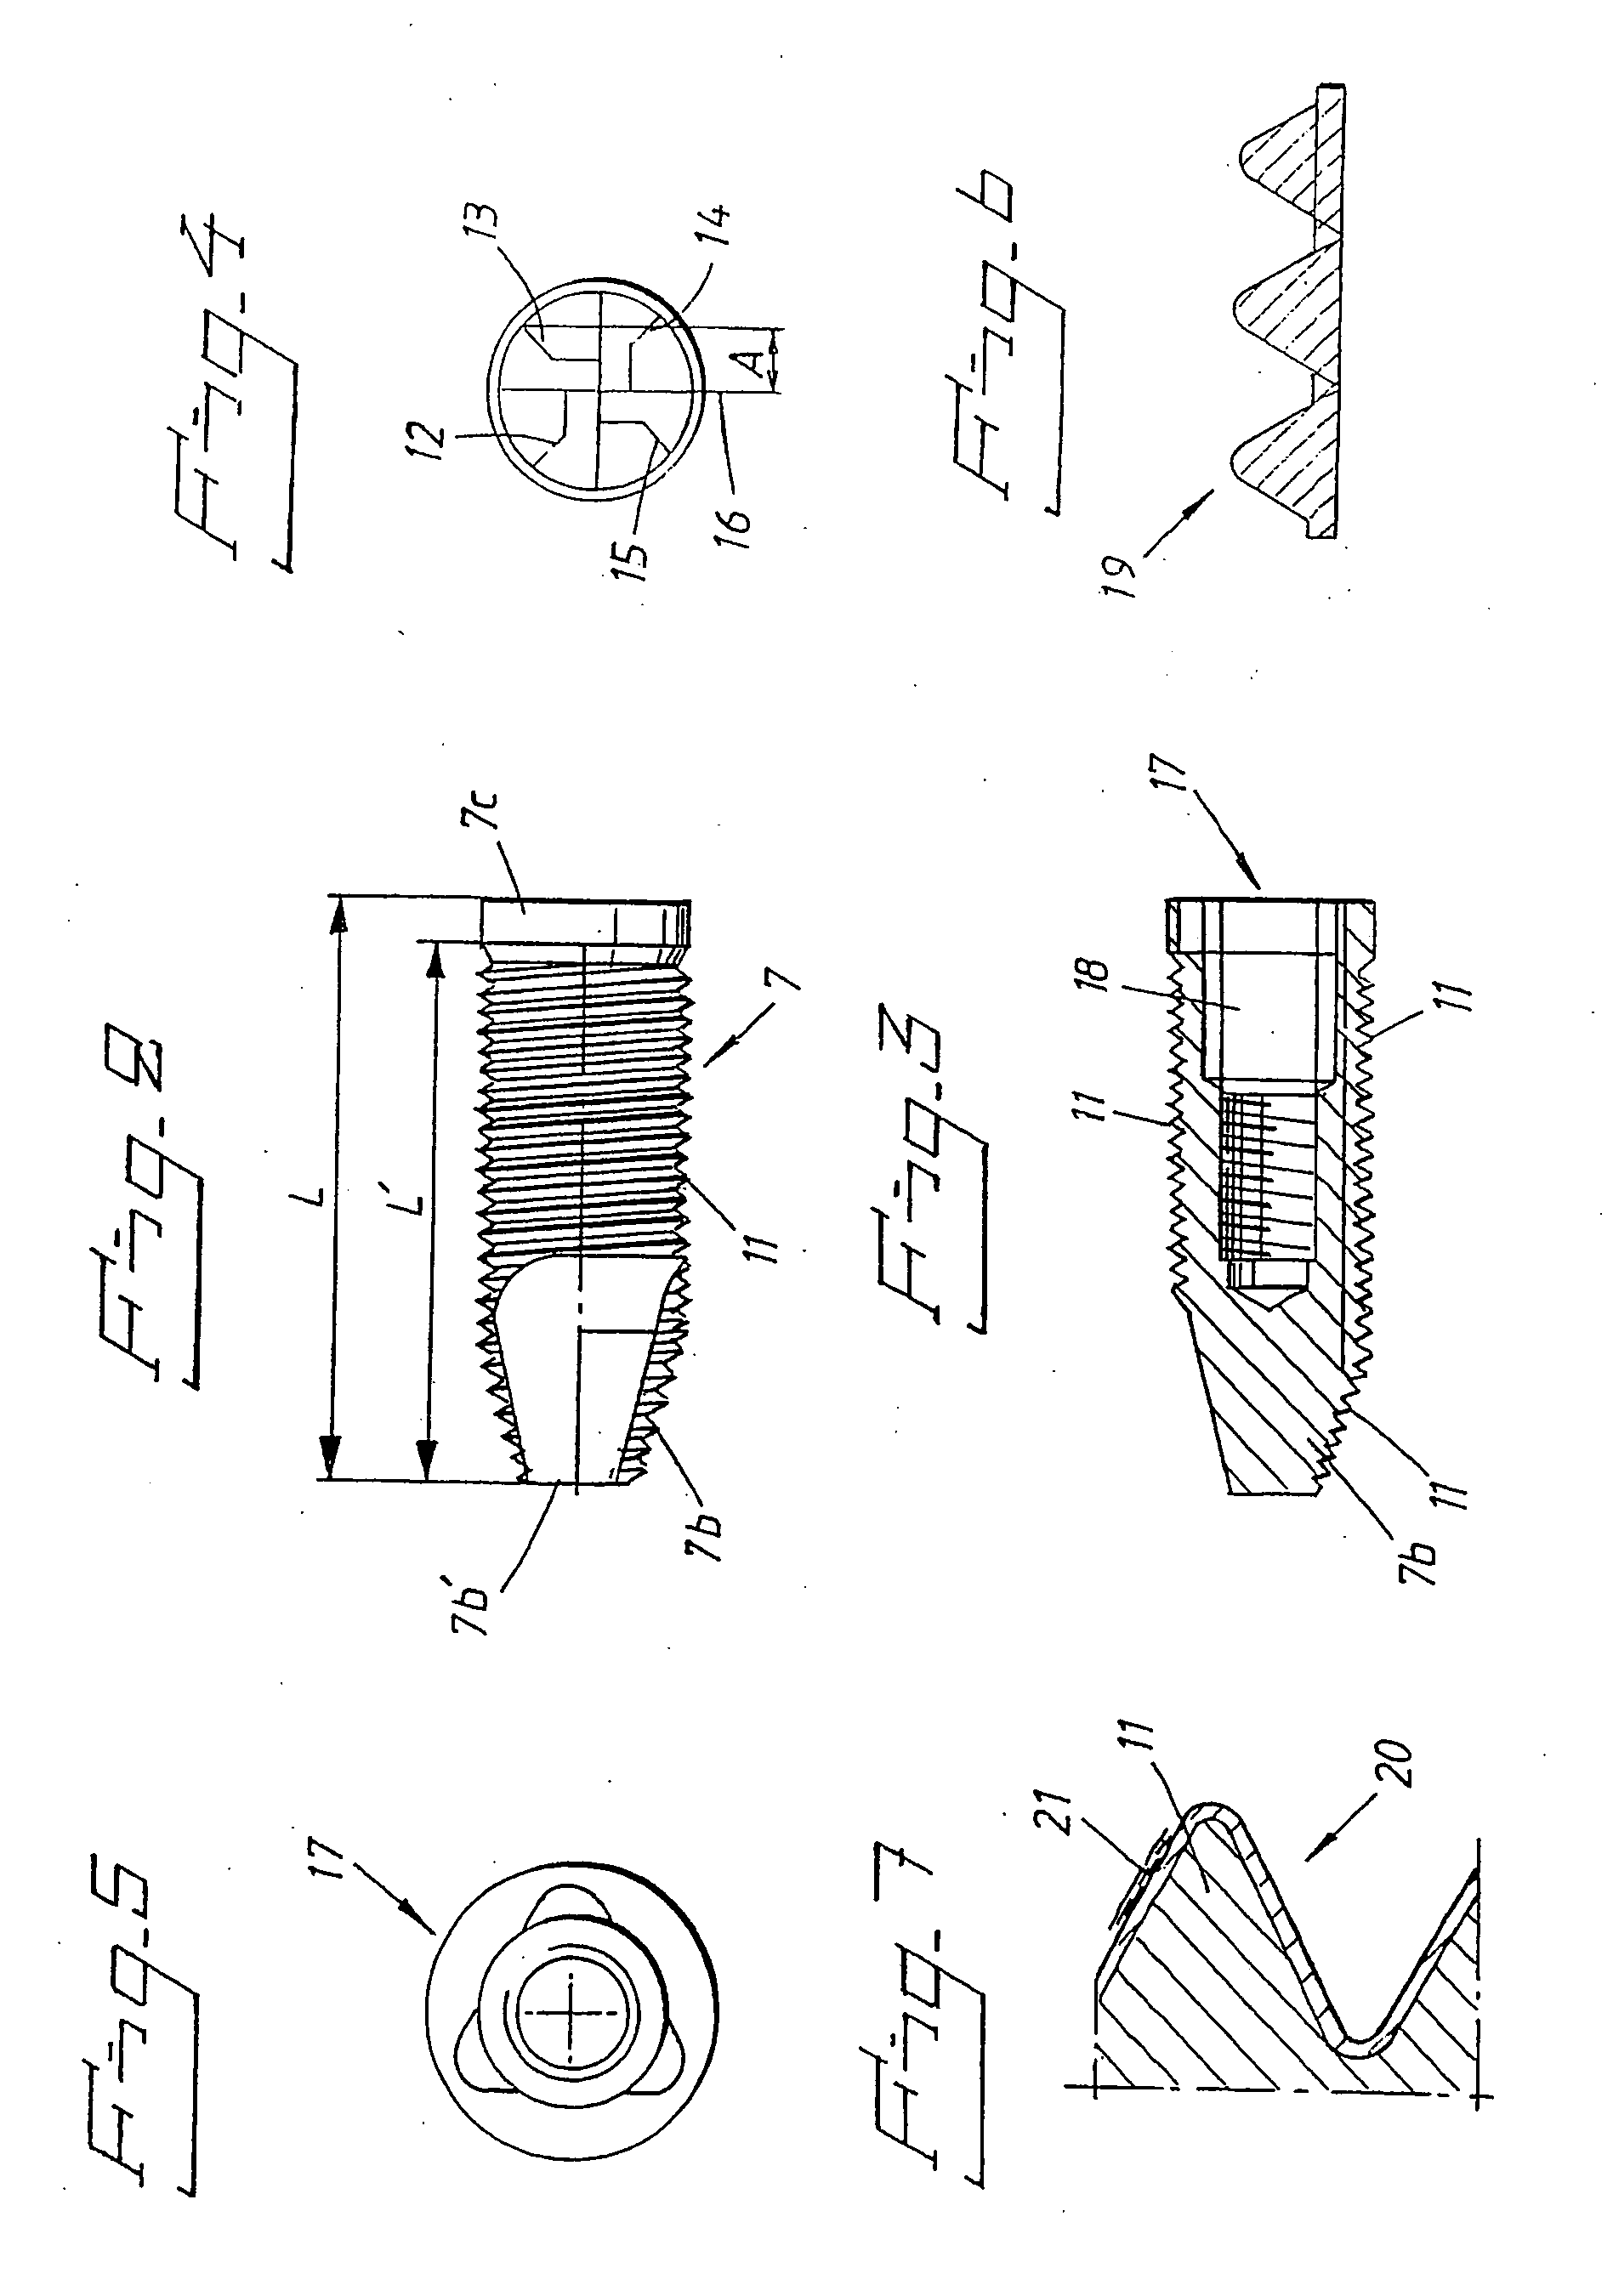 Fixture for anchoring in jaw bone